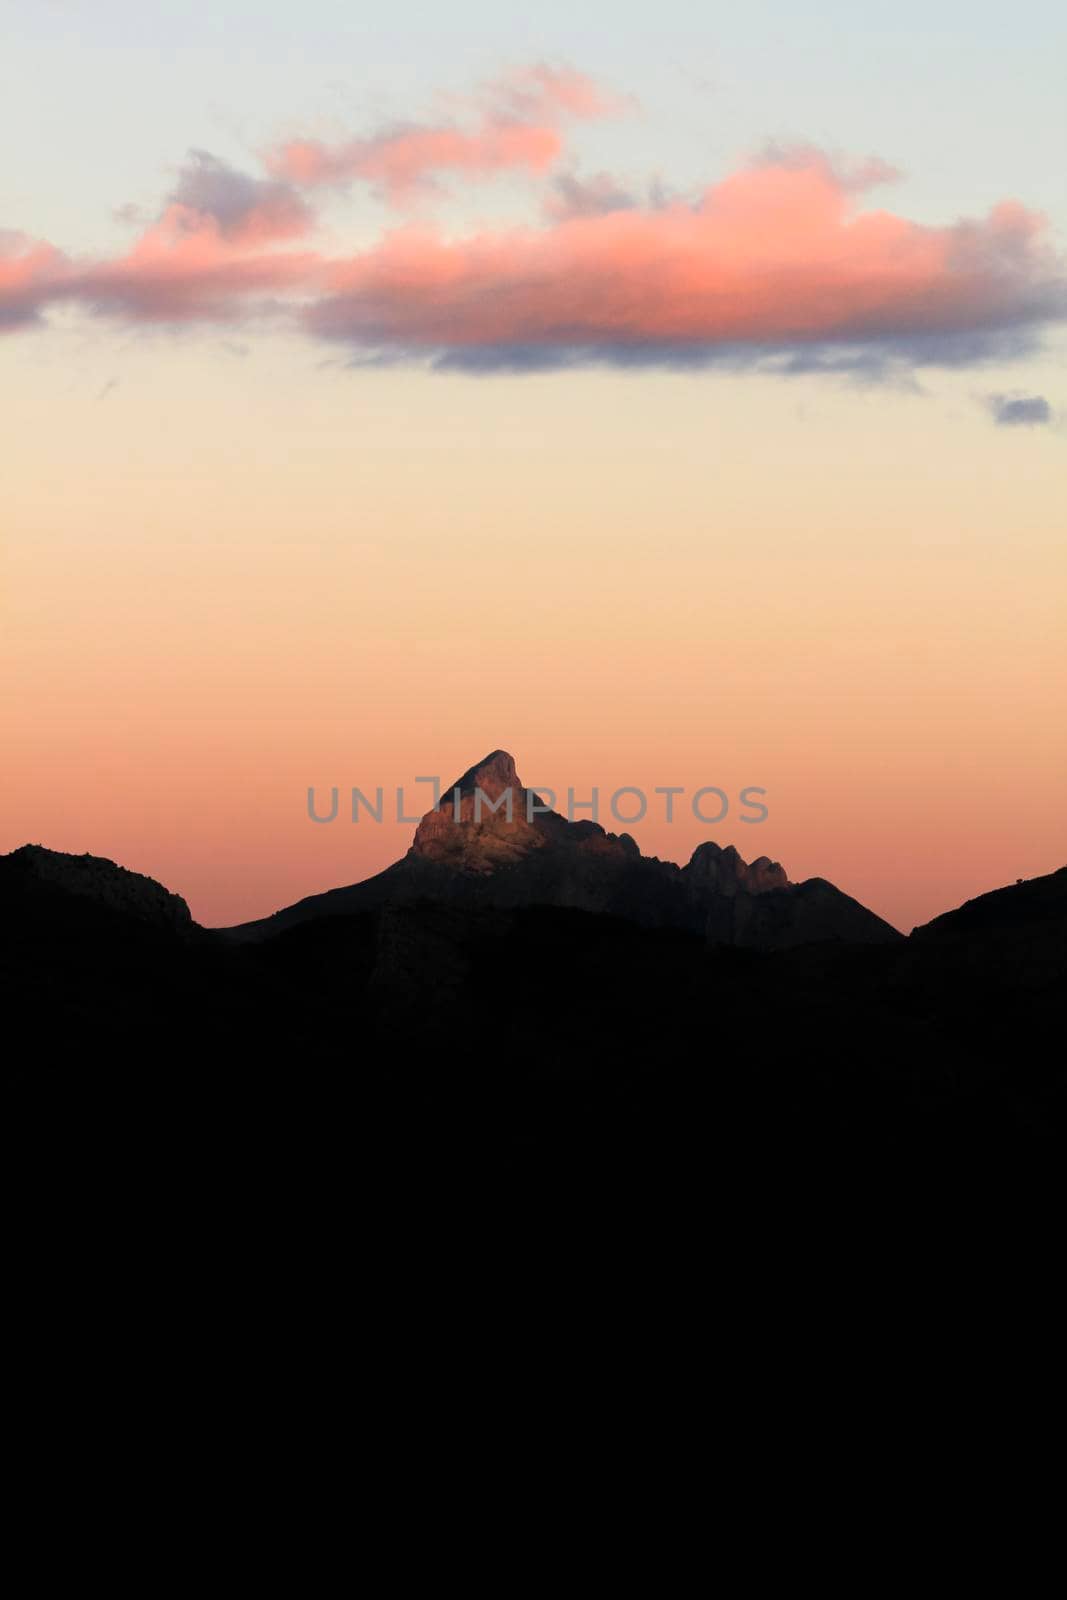 Spectacular sunset with colorful clouds and silhouette of mountains in Guadalest, Alicante, Spain